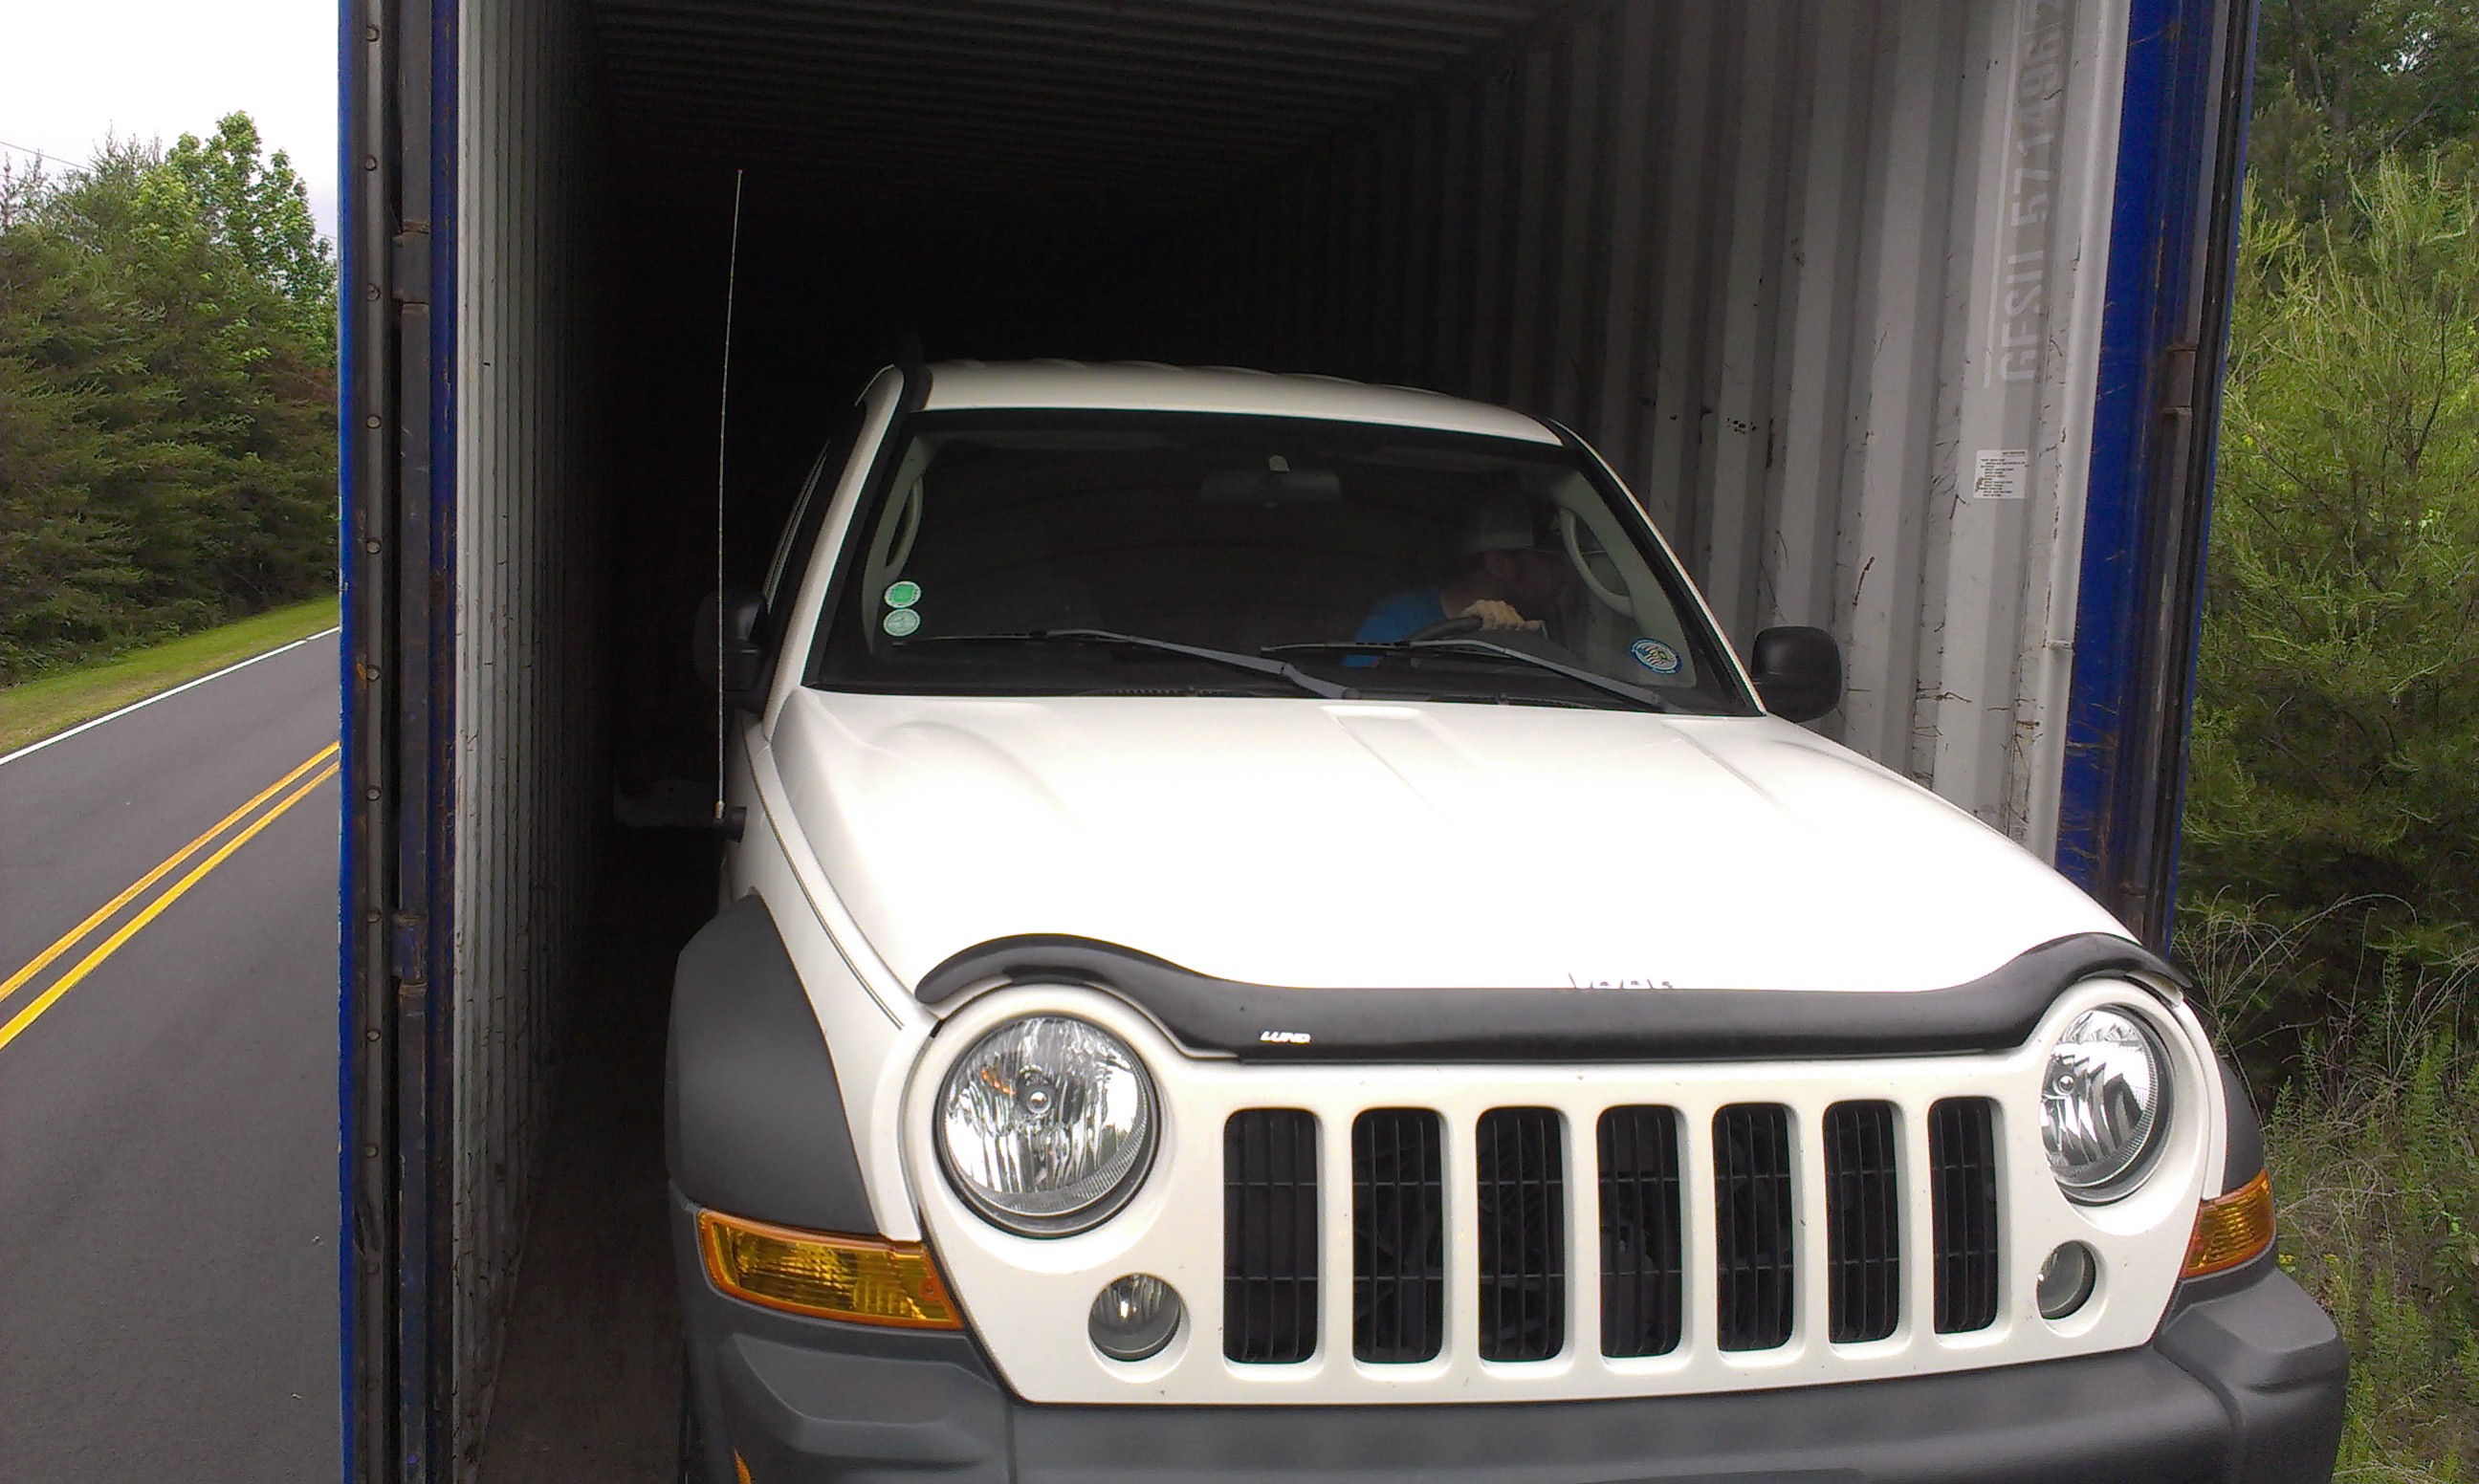 Packing Service, Inc. Loading Car into Shipping Container